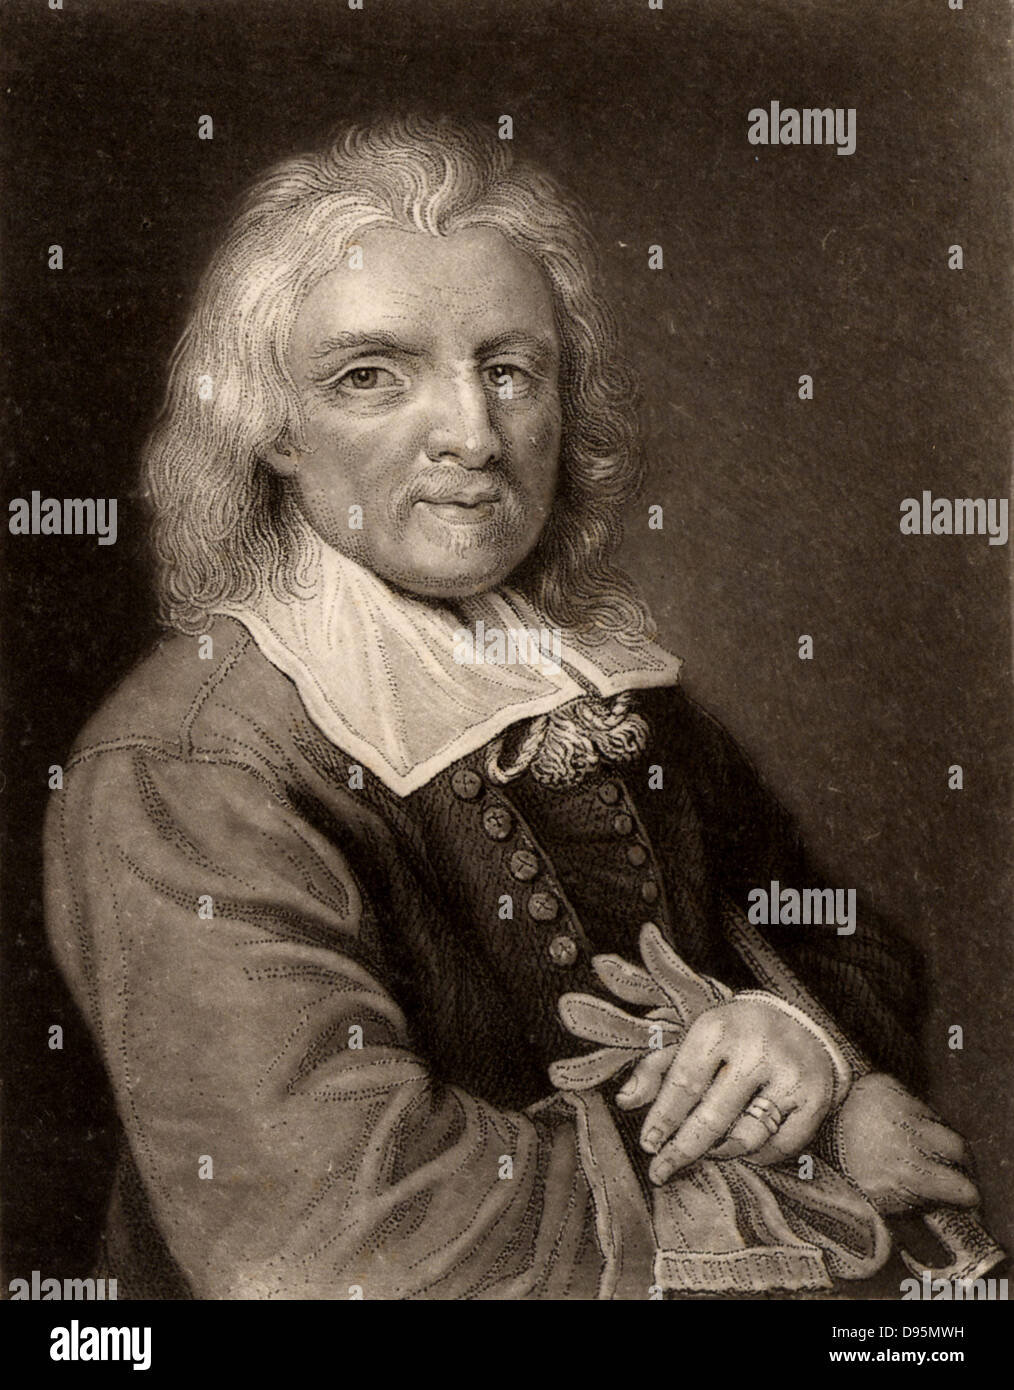 Isaak Walton (1593-1663) English writer and biographer born at Stafford, Staffordshire. His most famous work is 'The Compleat Angler' (1653).  He also wrote 'Lives' of John Donne, Henry Wotton, Richard Hooker and Richard Herbert. Engraving. Stock Photo